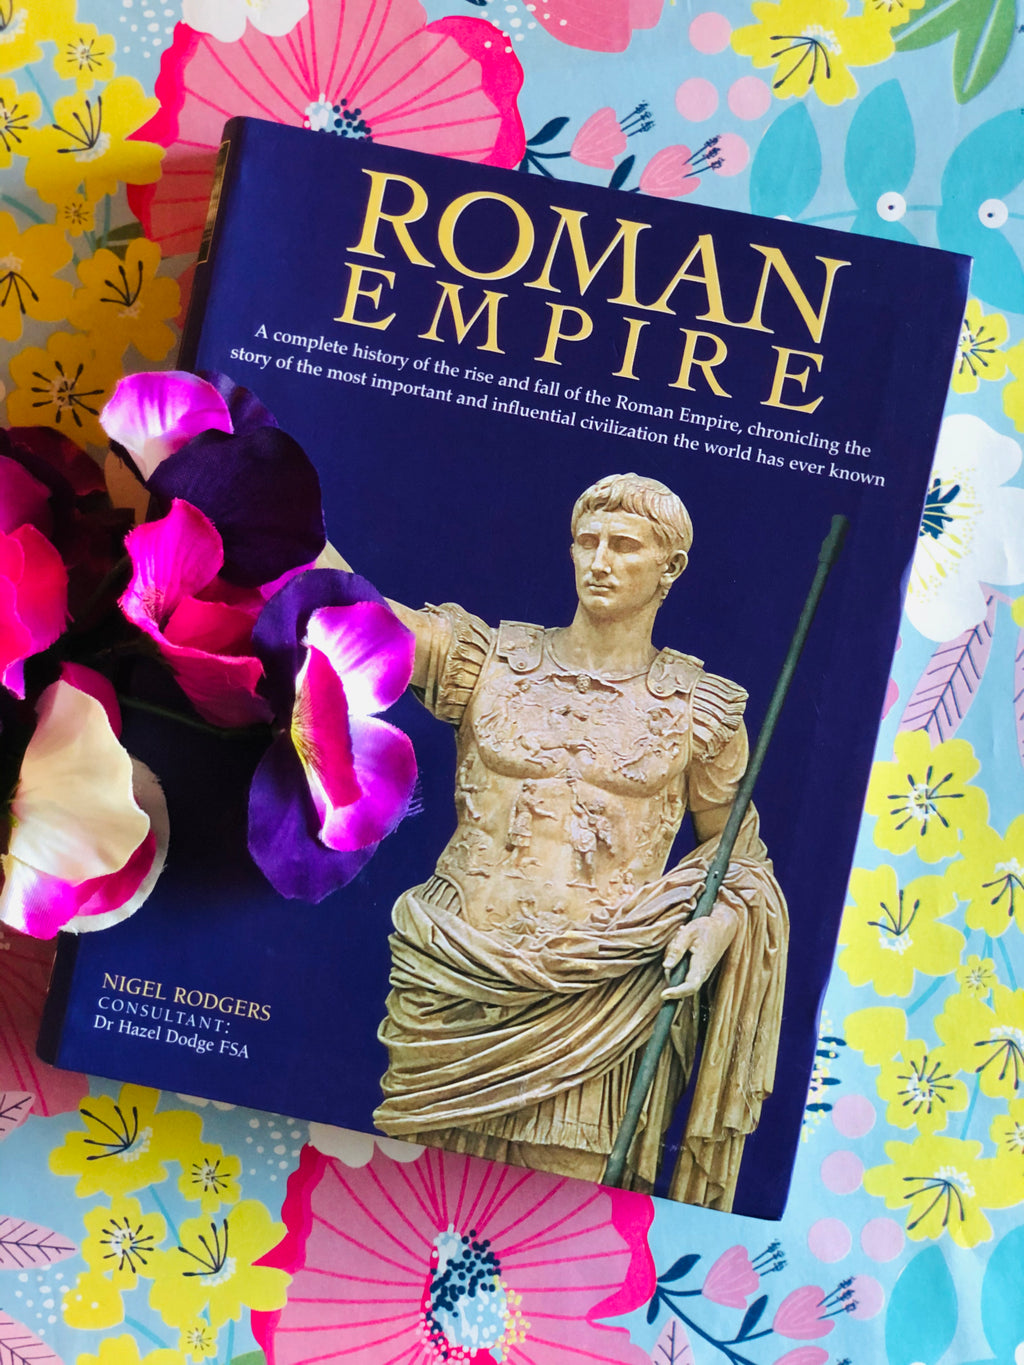 Roman Empire- By Nigel Rodgers